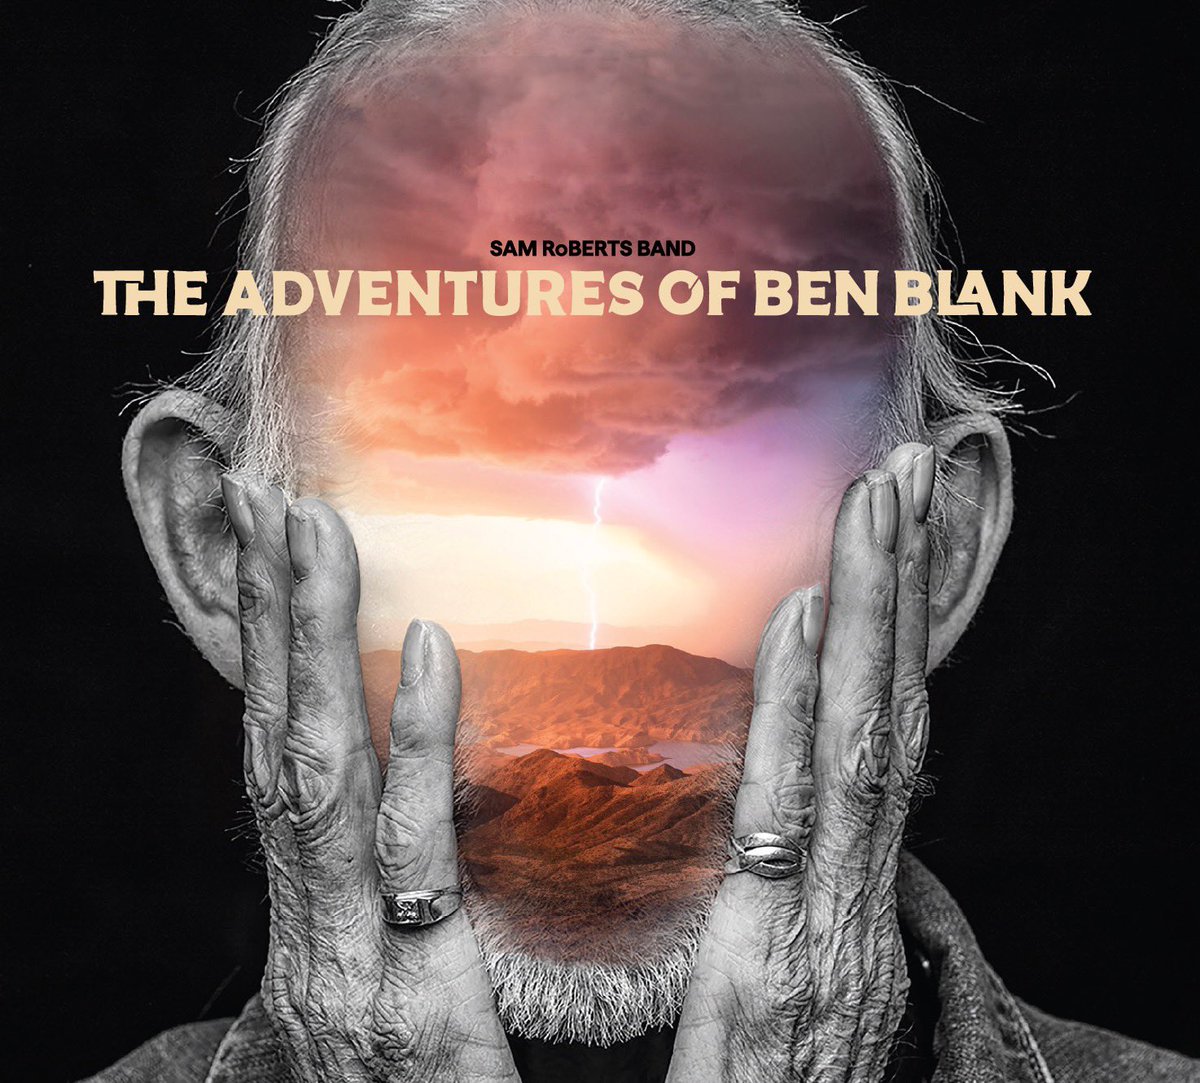 Thrilled to announce our 8th album The Adventures Of Ben Blank is coming out October 8th… Nee track Afterlife available now!!